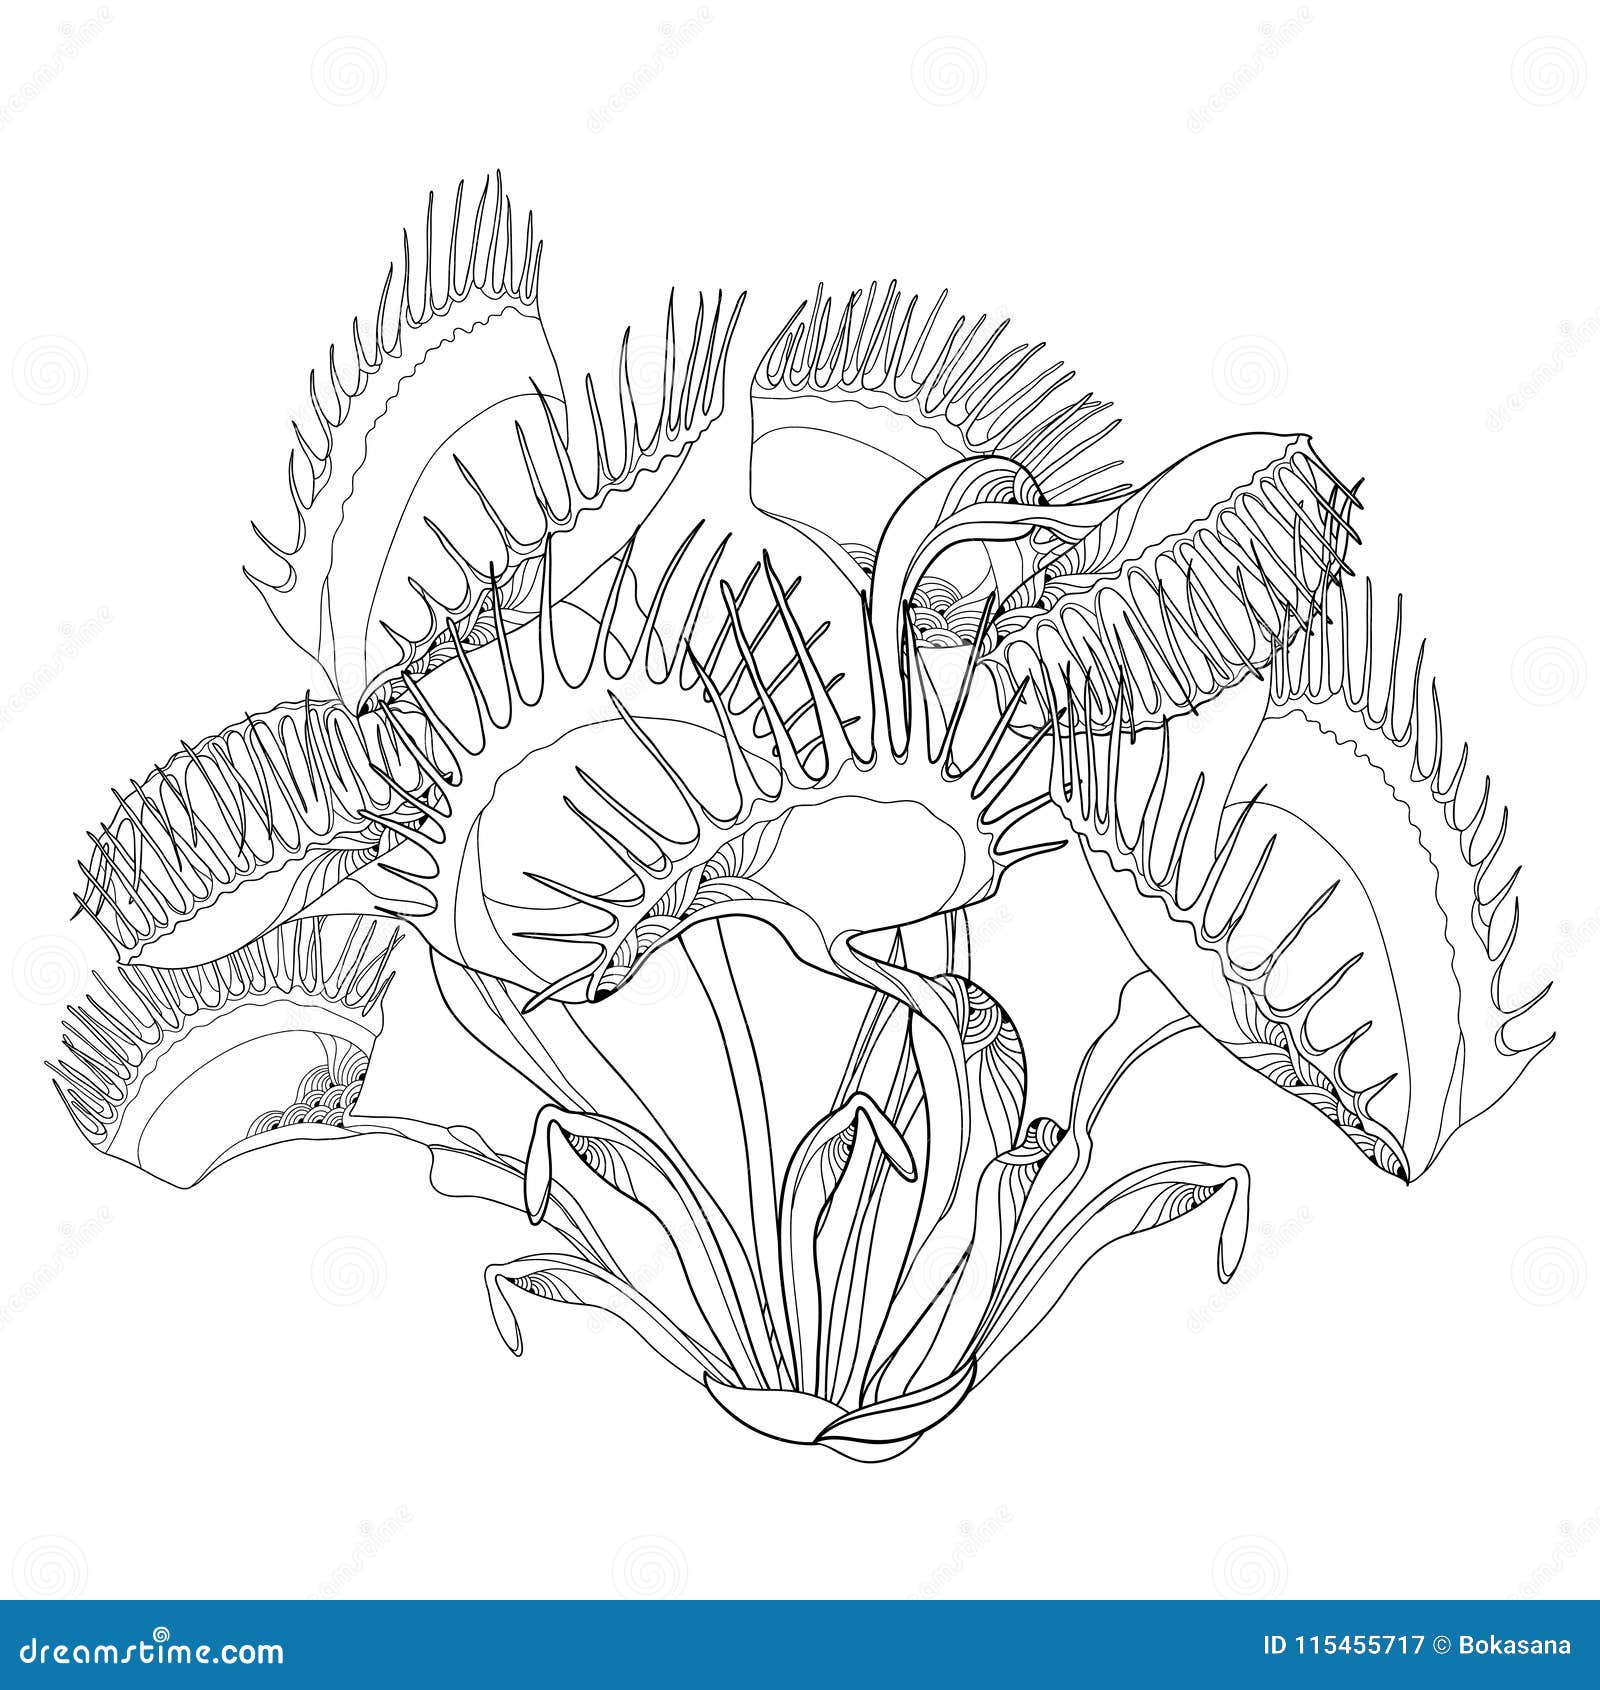  drawing of venus flytrap or dionaea muscipula with open and close trap in black  on white background.